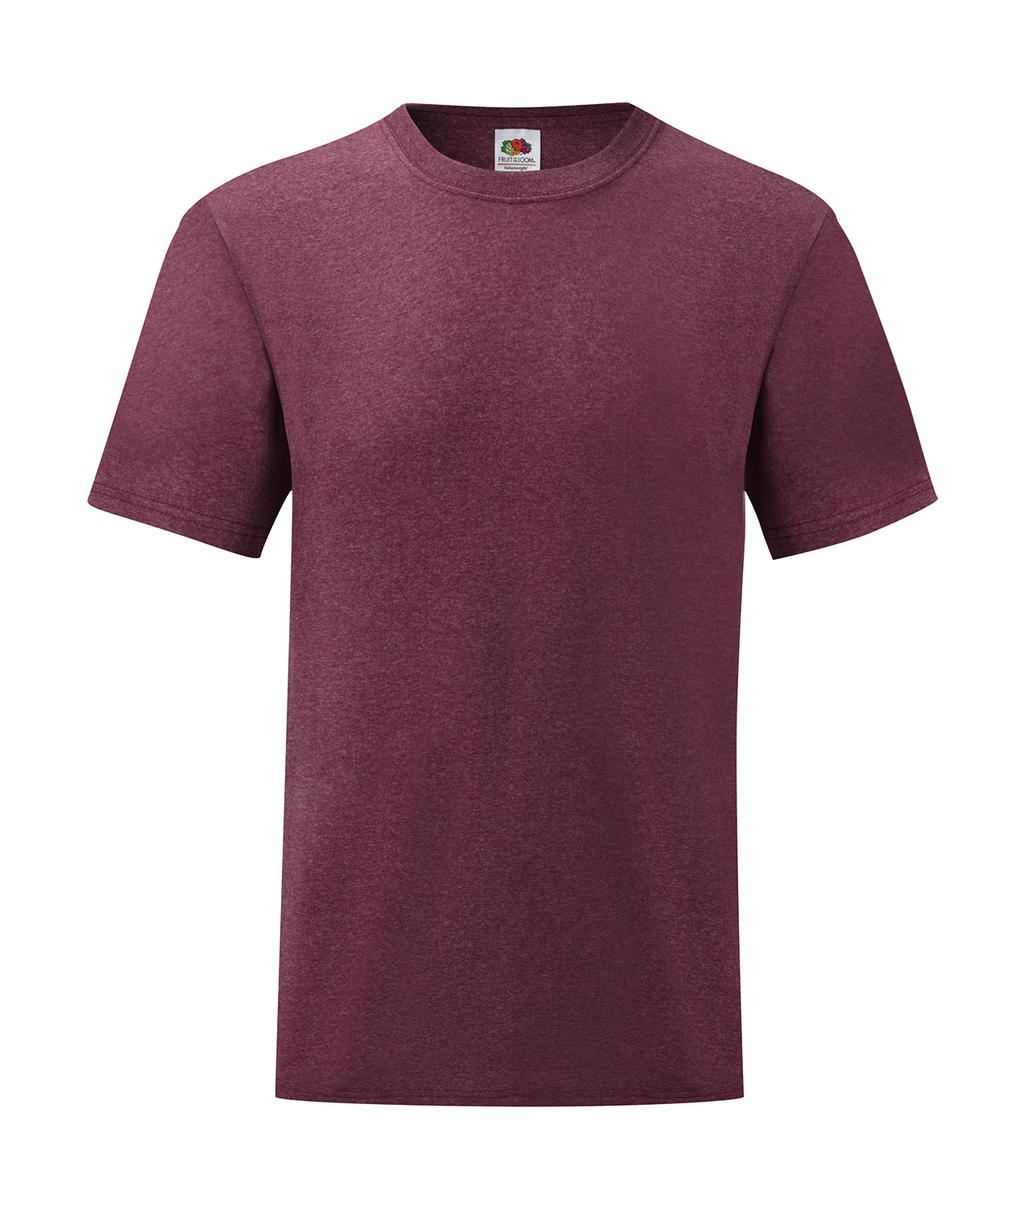  Valueweight Tee in Farbe Heather Burgundy